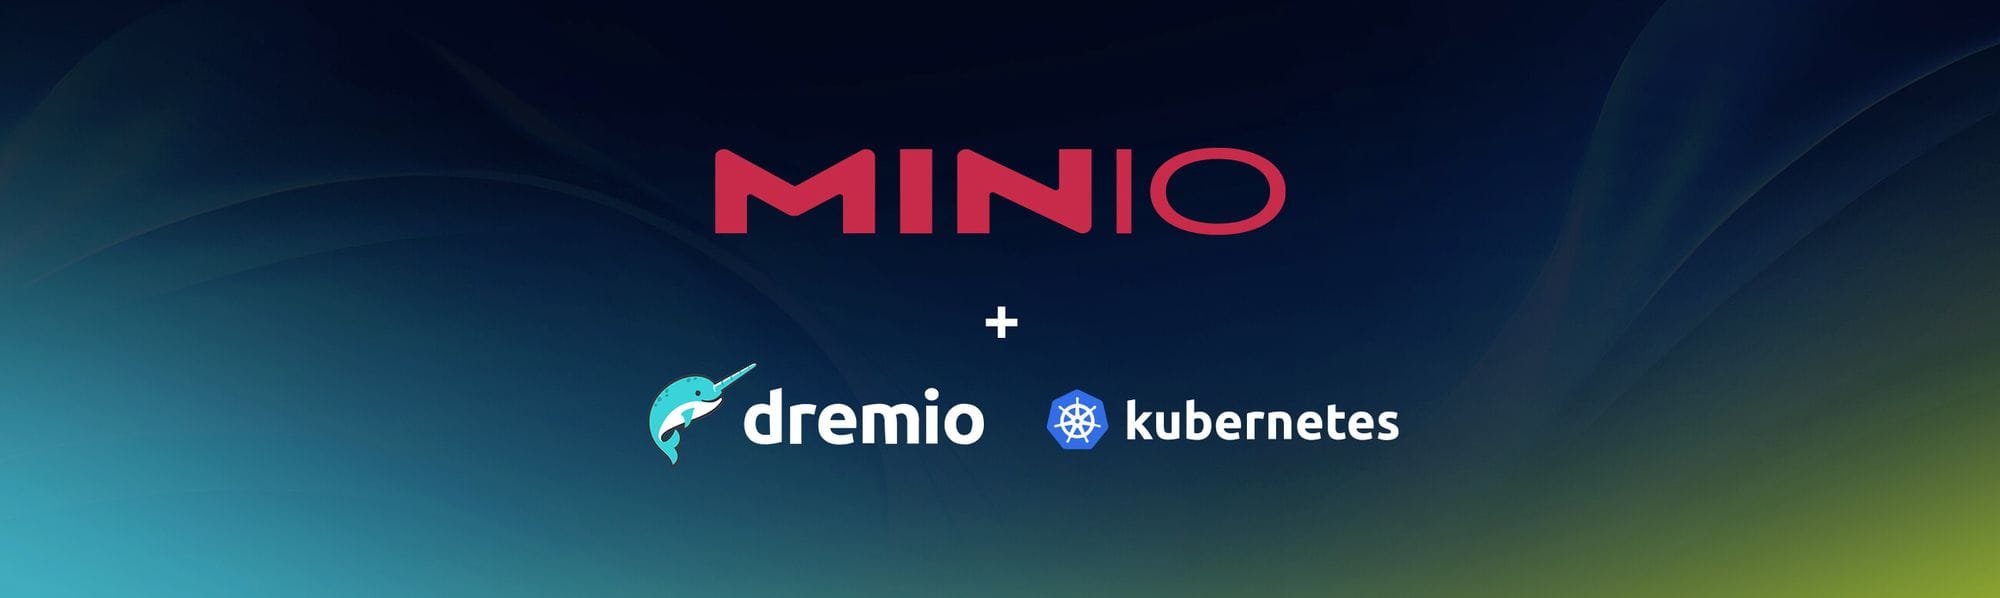 Connect Dremio to MinIO with Self-Signed TLS